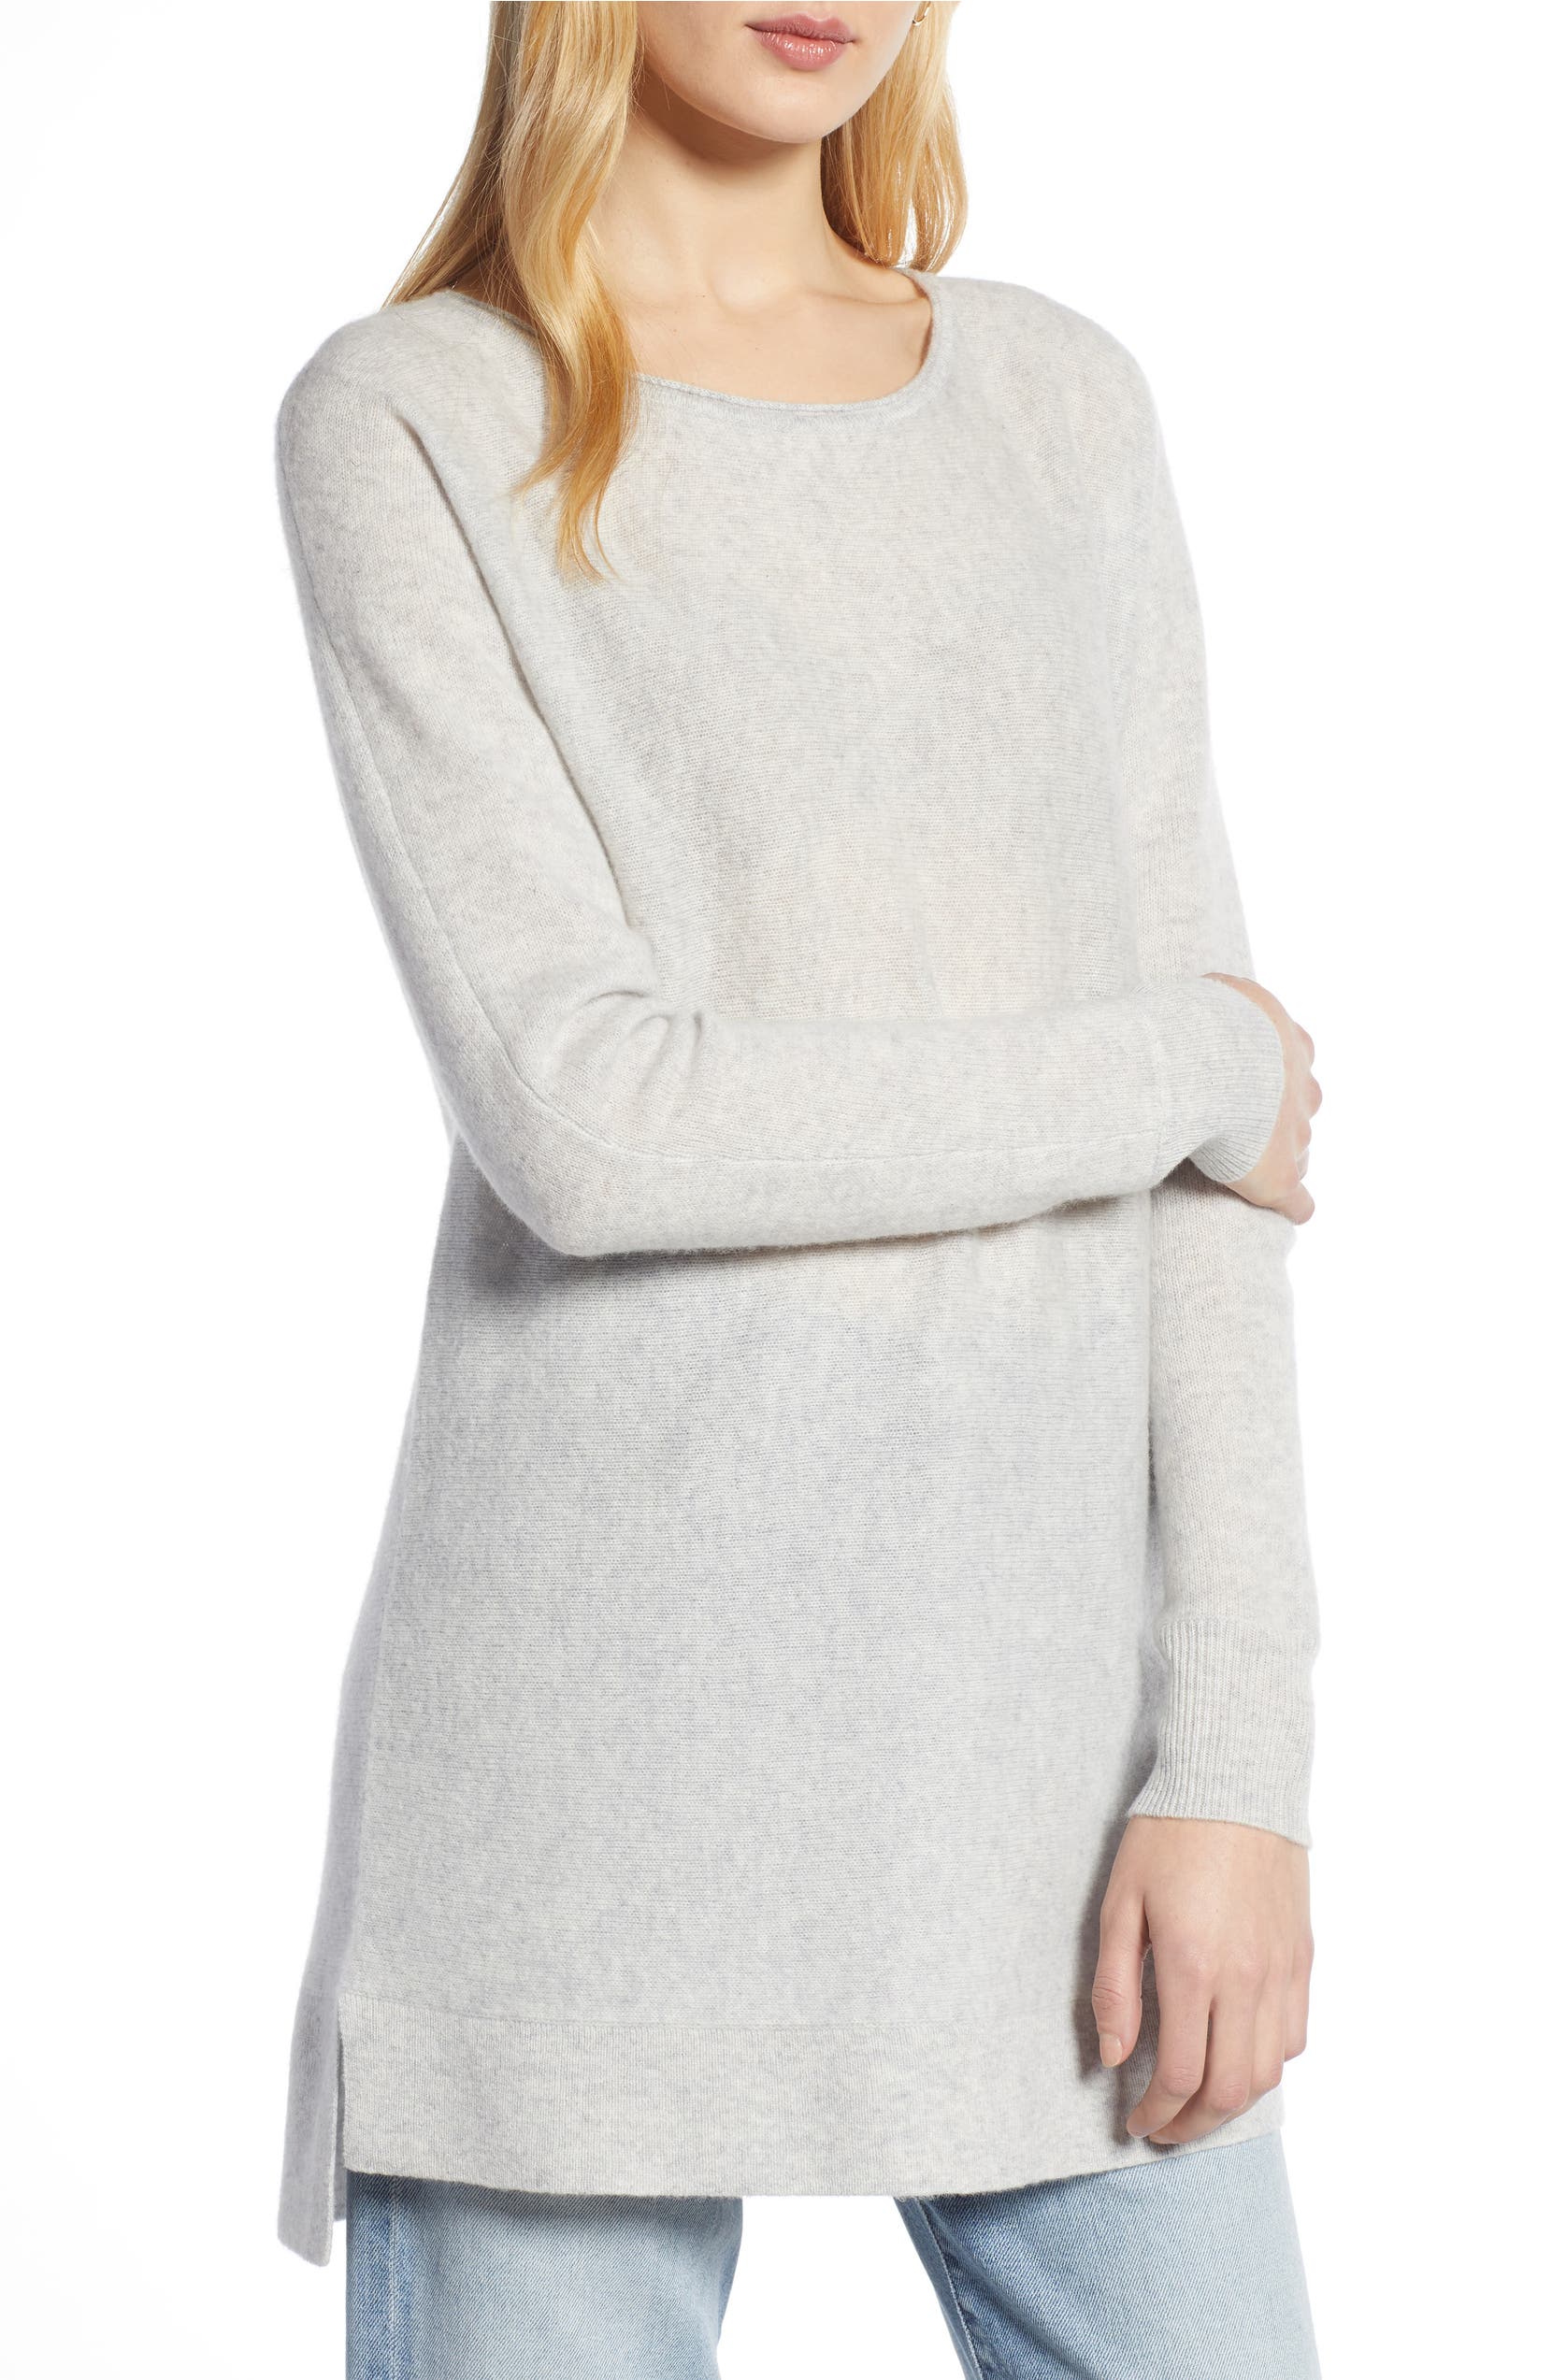 High/Low Wool & Cashmere Tunic Sweater, Main, color, GREY LIGHT HEATHER